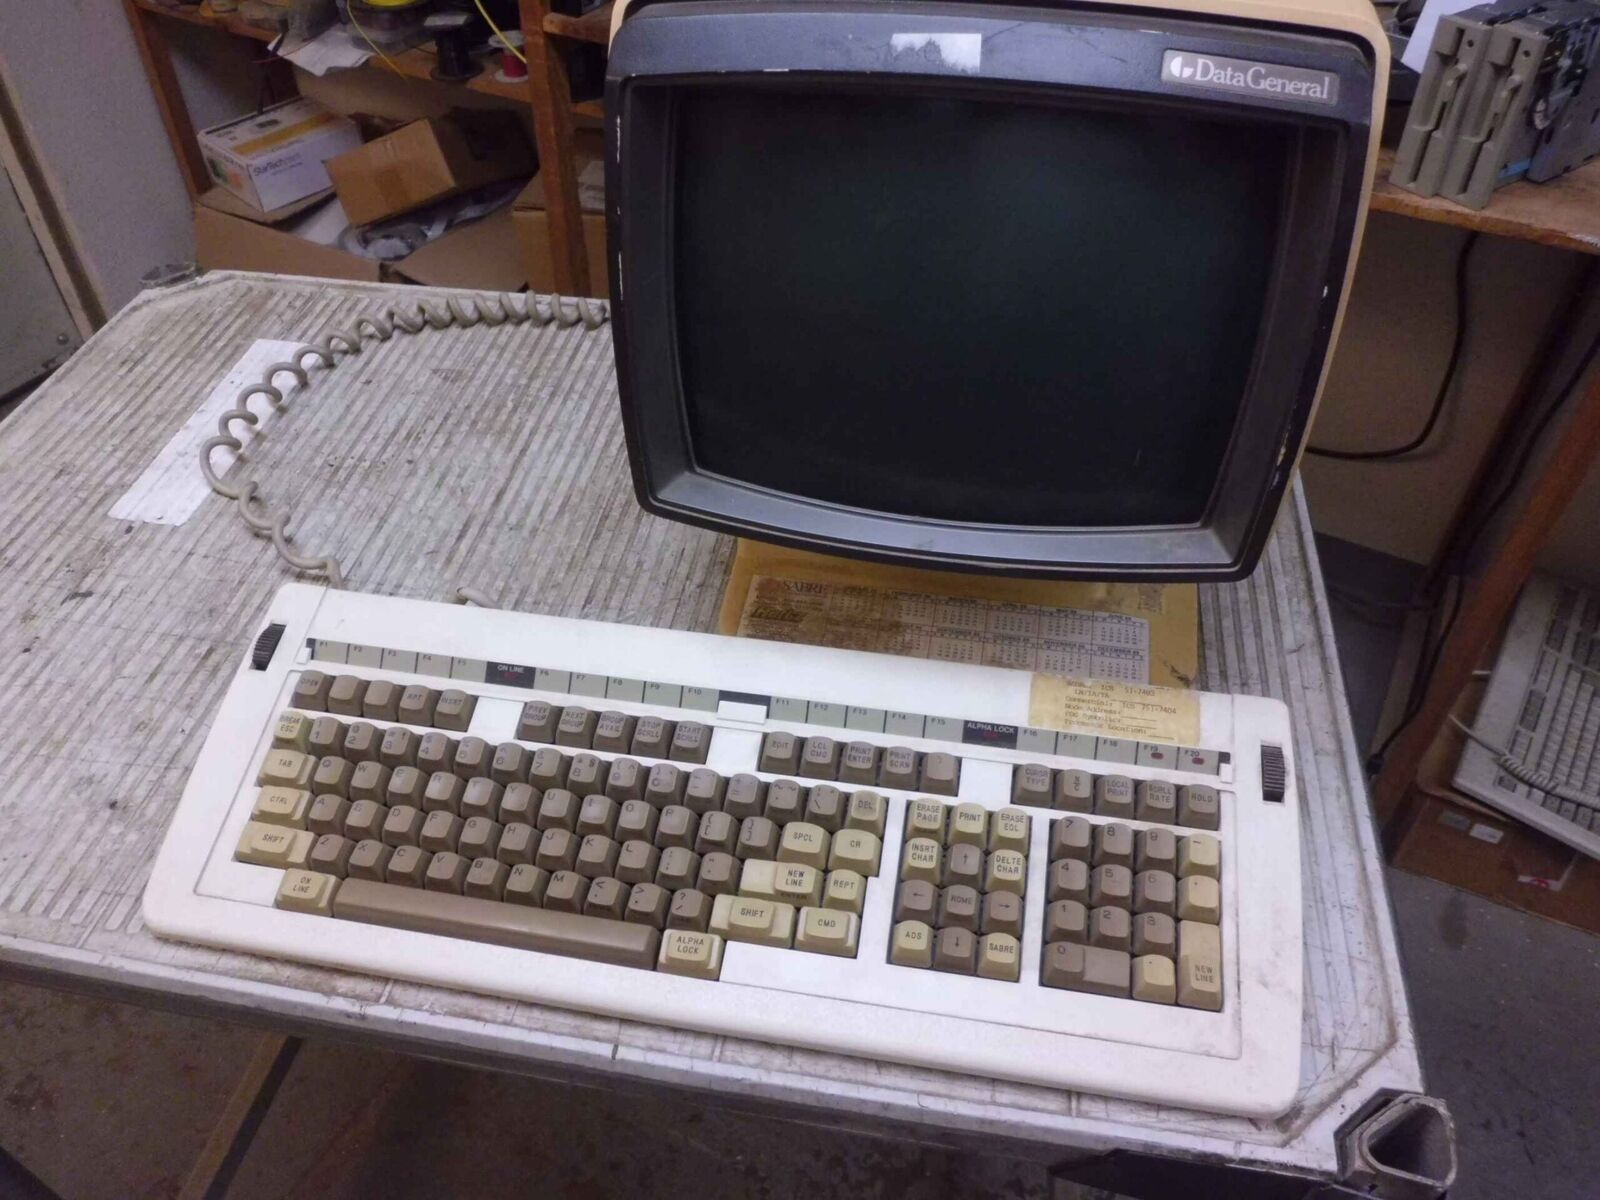 TYPE D210, MODEL 6242, 6242, D210 DATA GENERAL TERMINAL WITH KEYBOARD